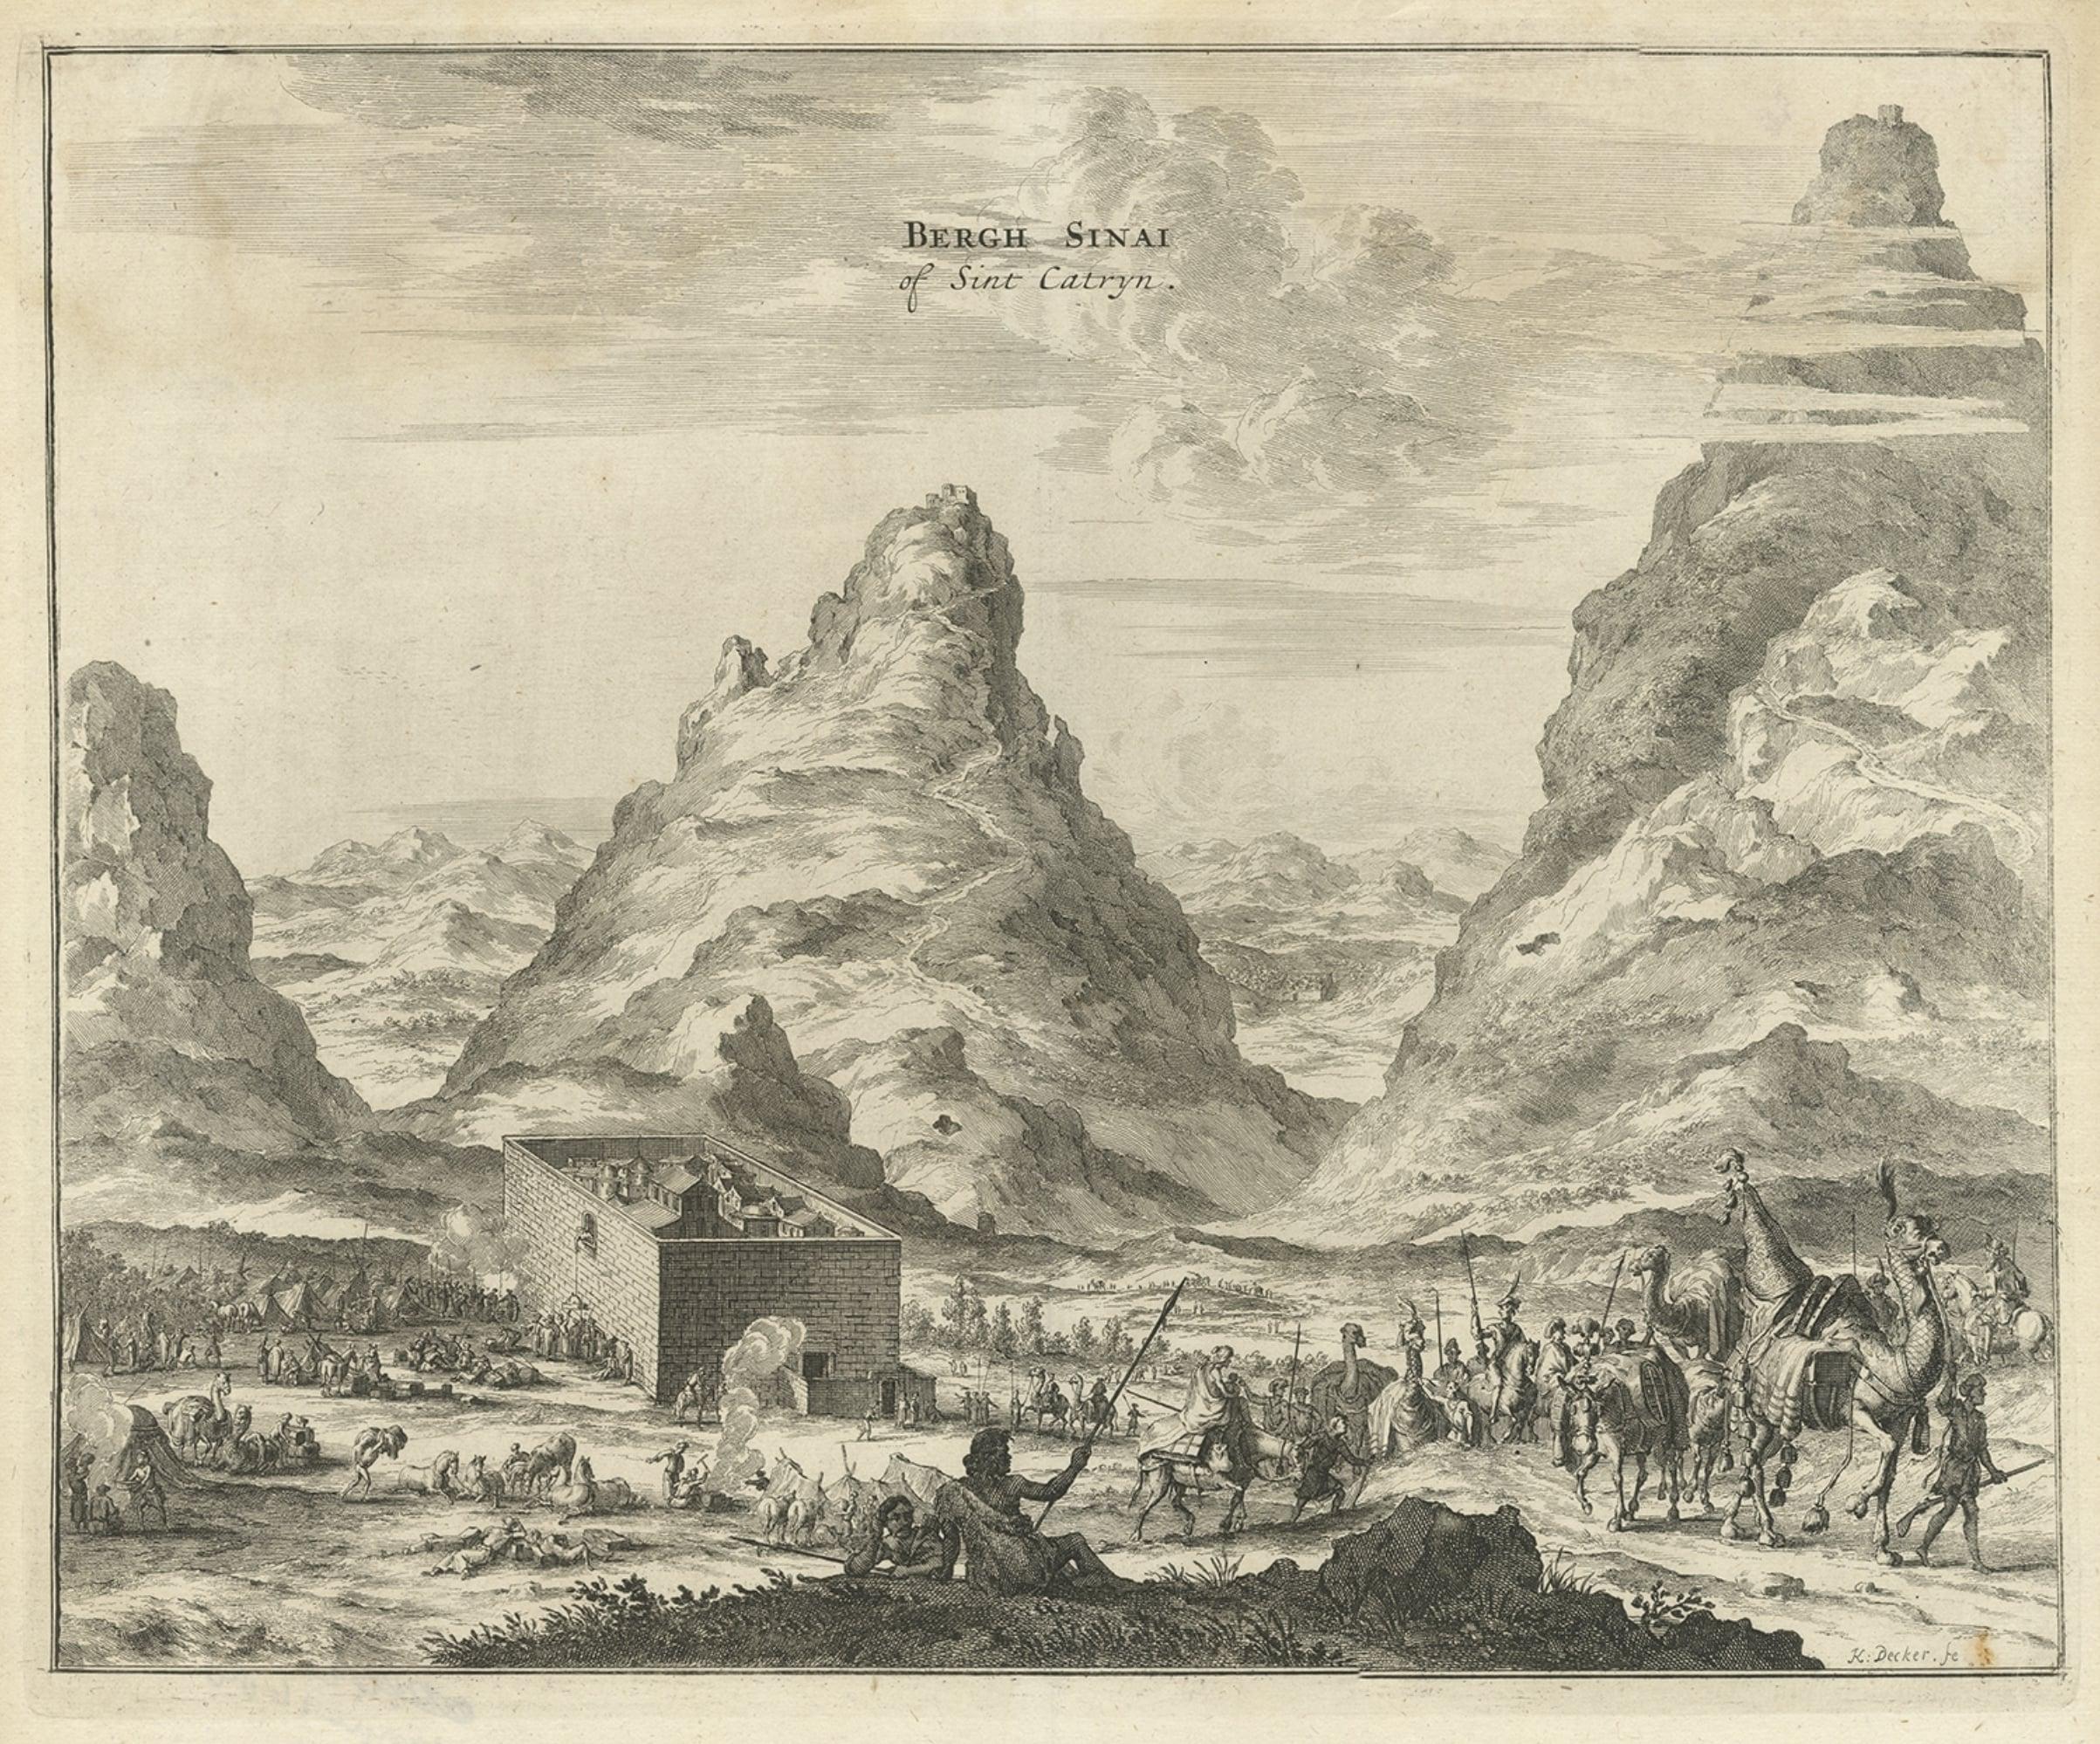 Rare antique print titled ‘Bergh Sinai of Sint Catryn’. 

This engraving shows Mount Sinai (also known as Mount Horeb) with St. Catherine's Monastery at the foot of the mountains and Bedouin encampments surrounding it. Engraved by Karl